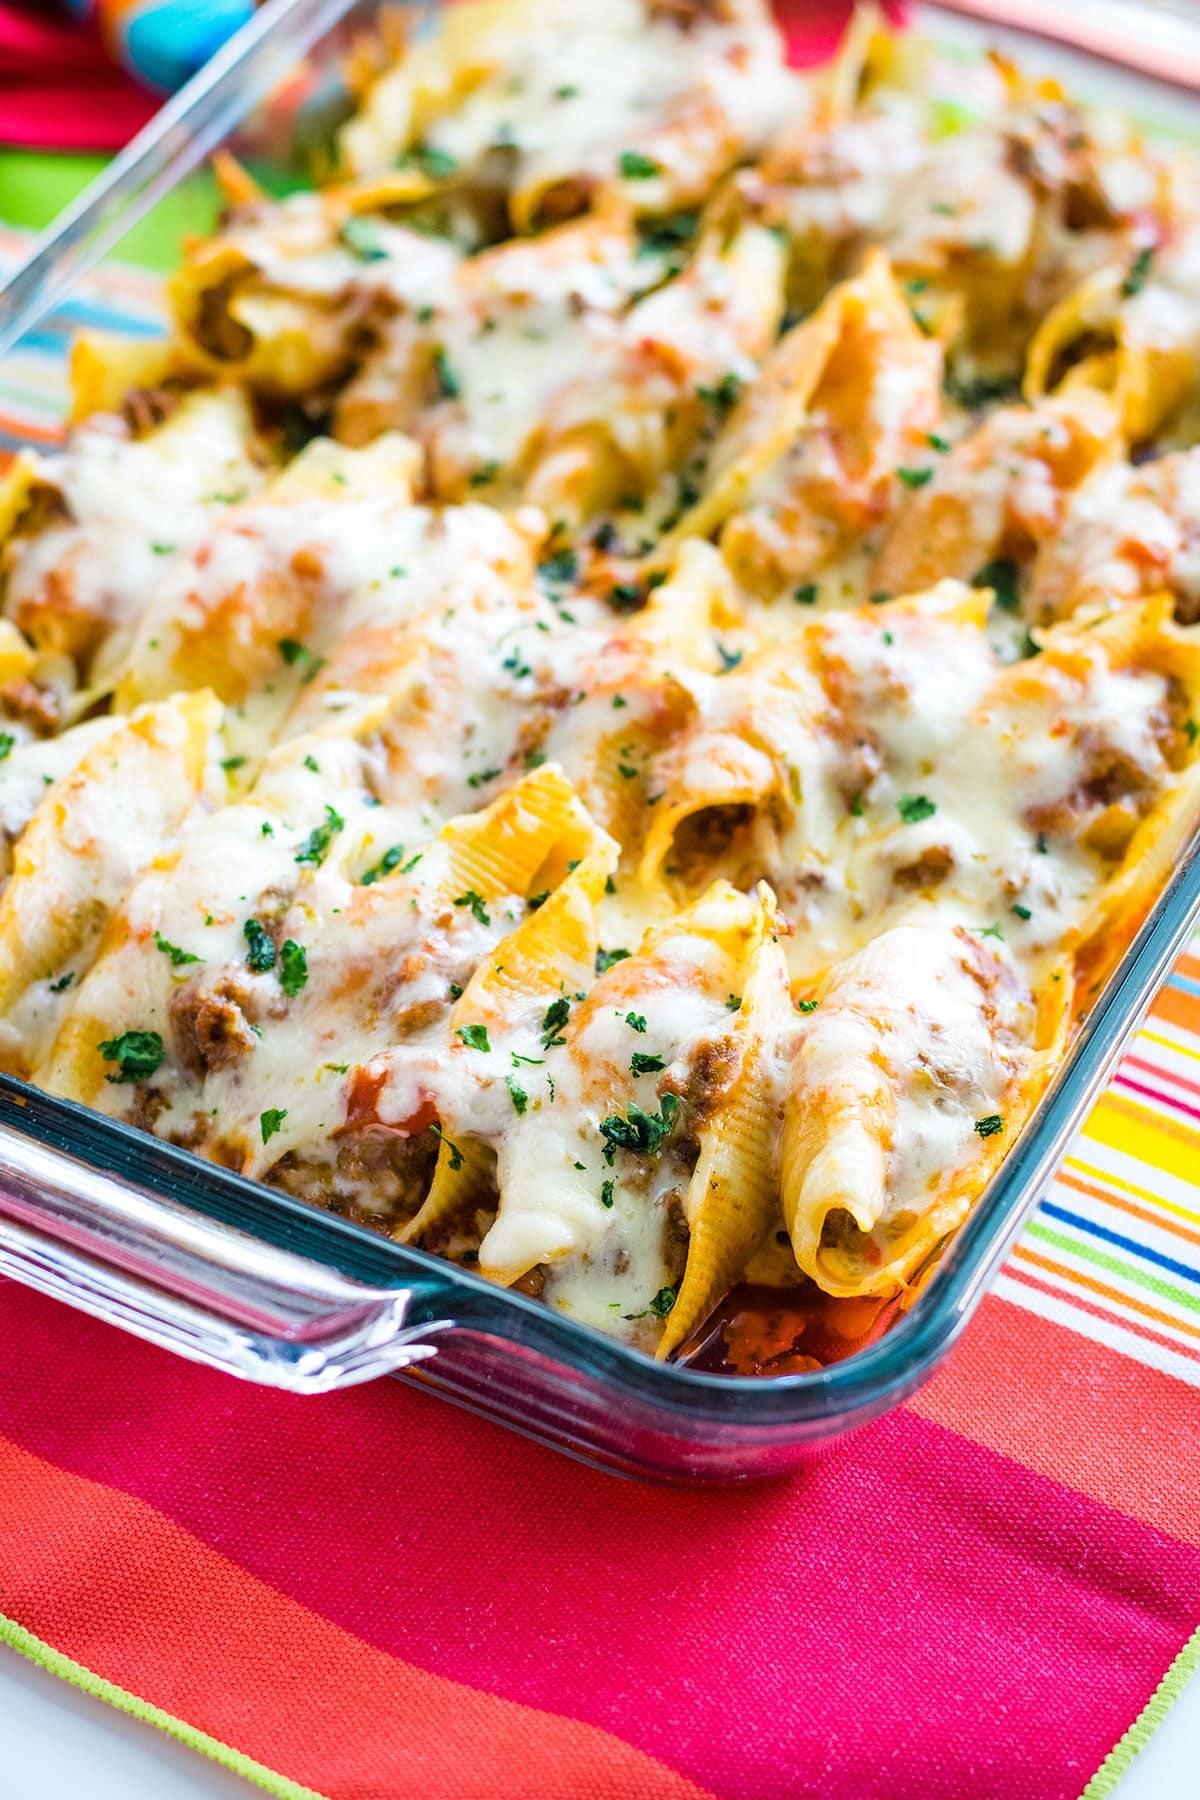 A close-up of Mexican stuffed shells topped with melted cheese.